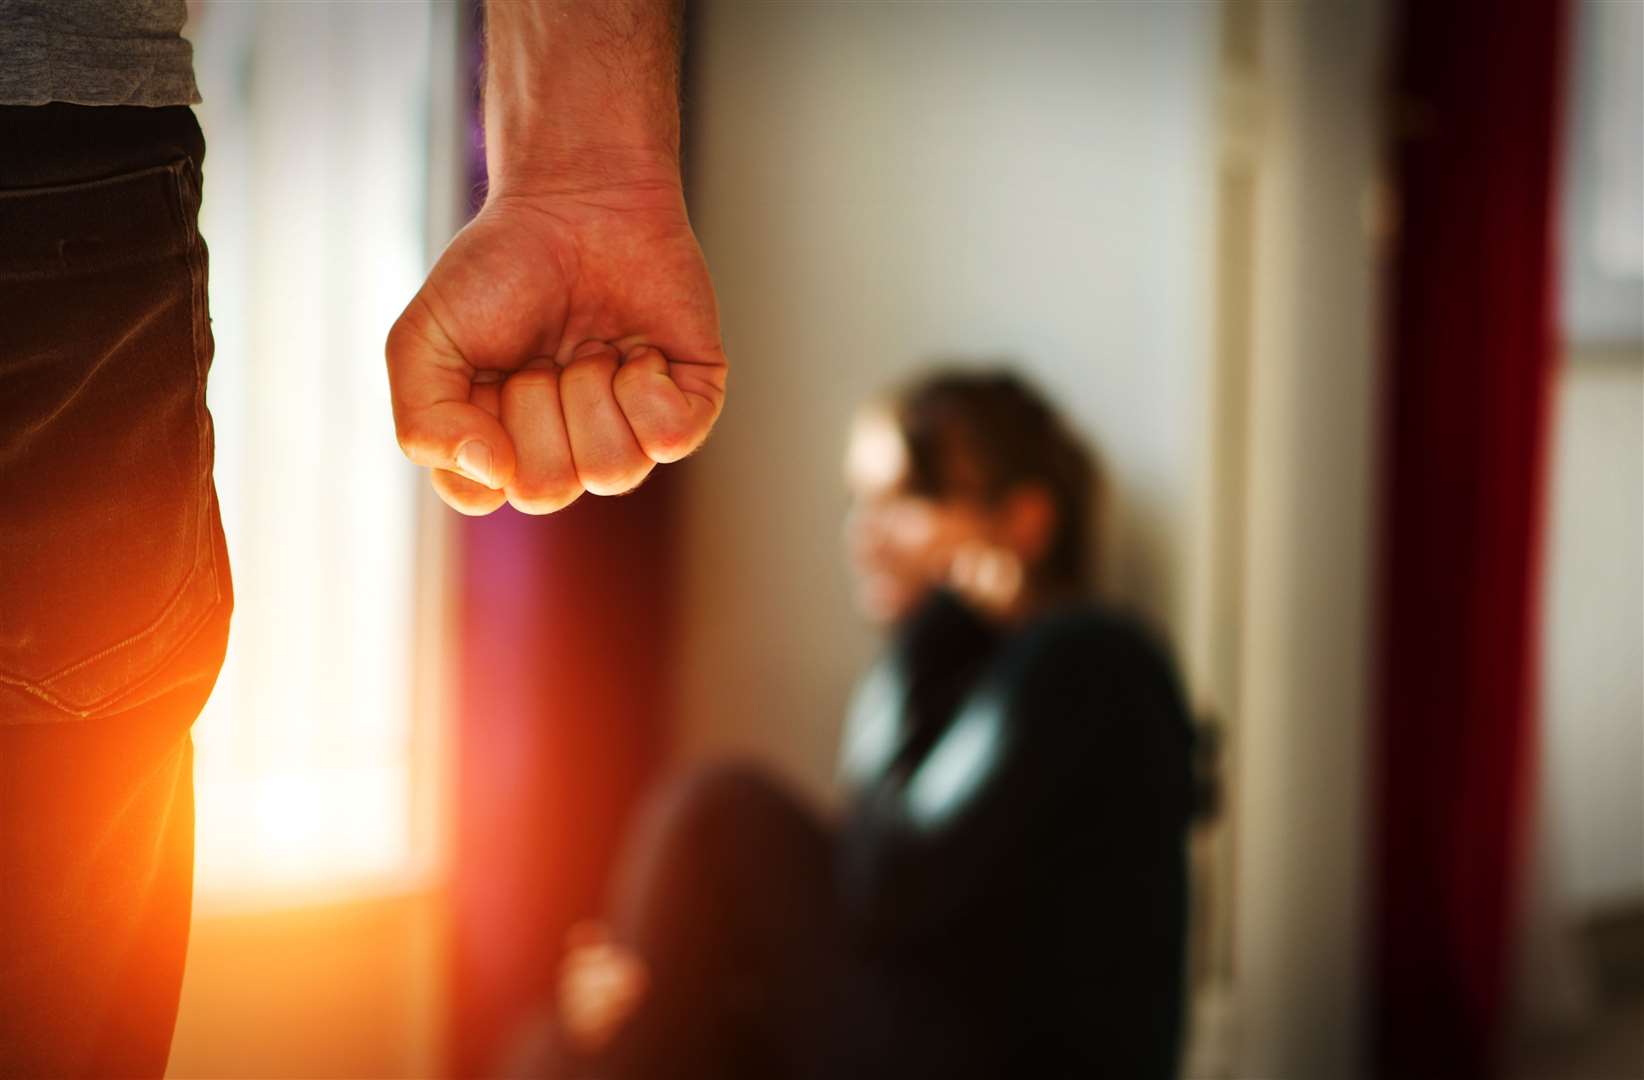 The Disclosure Scheme can alert people if their partner has a history of domestic abuse.